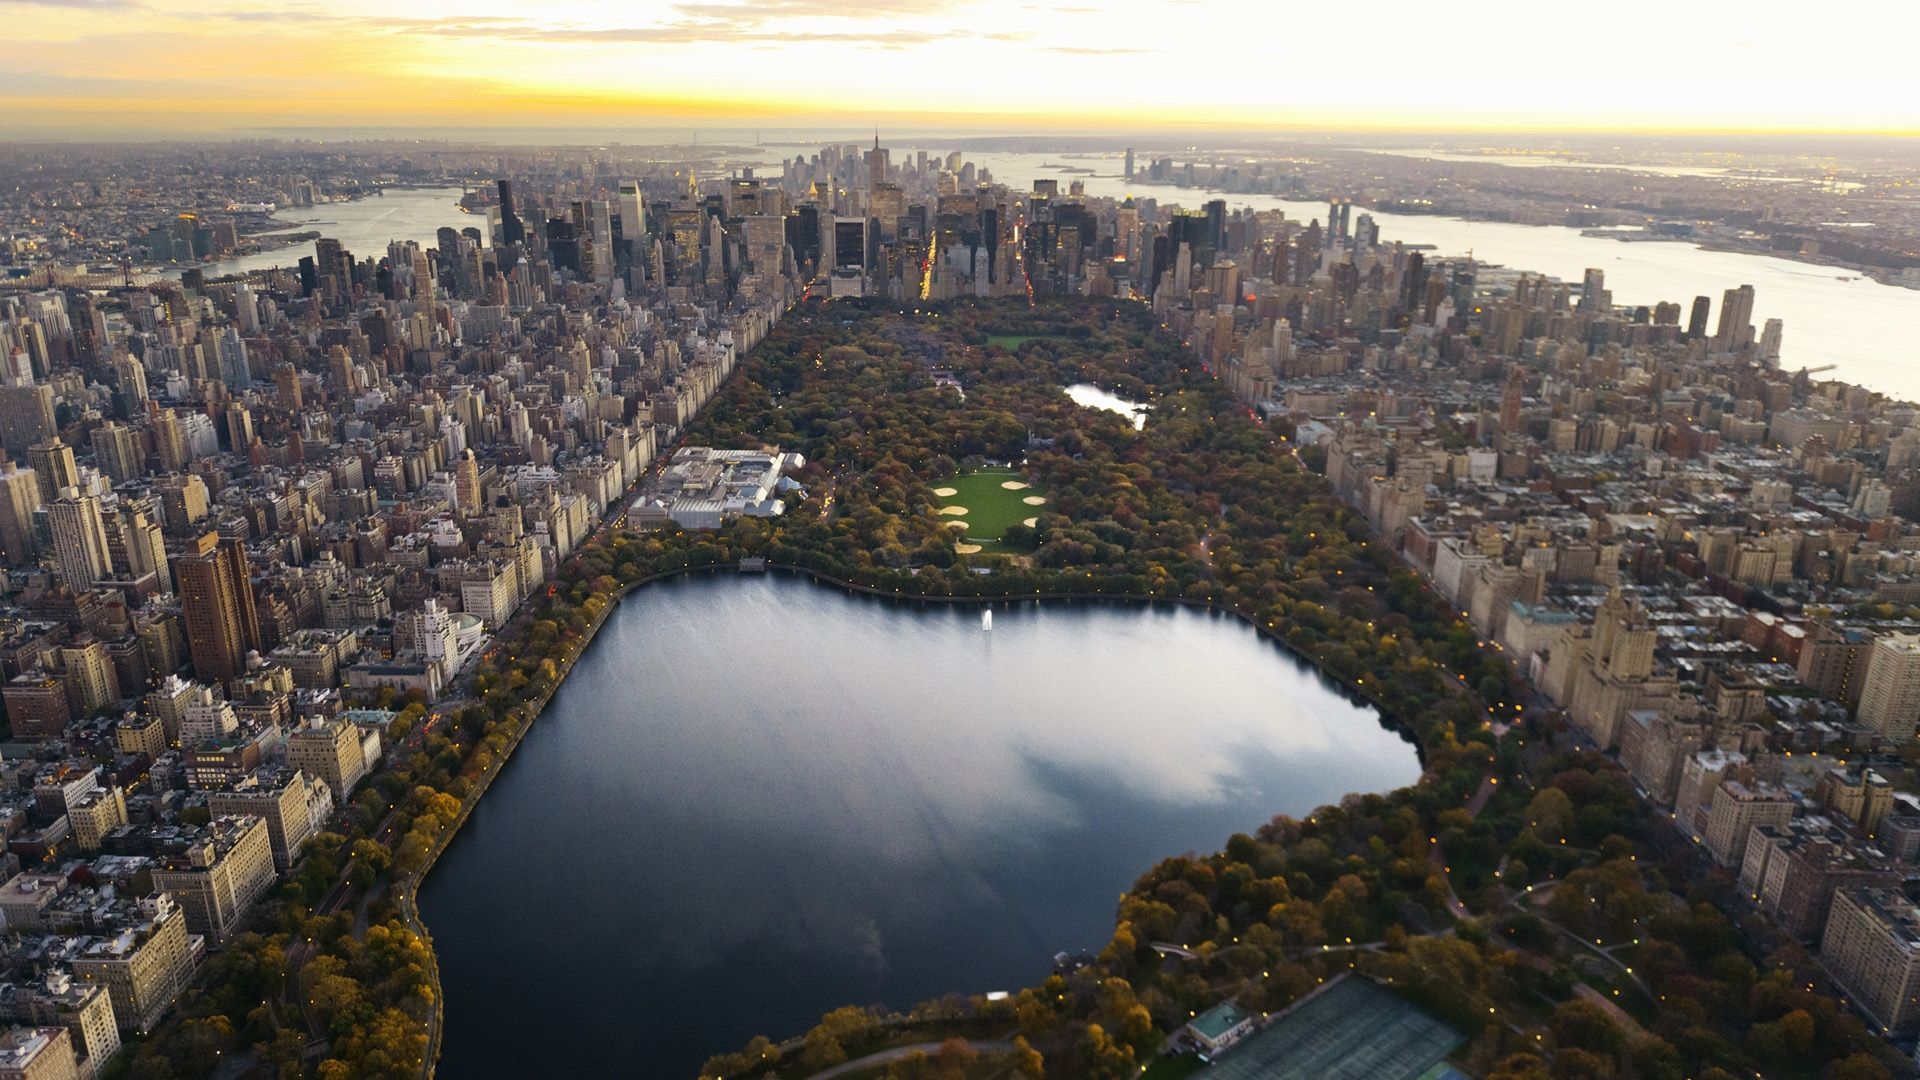 Download Wallpaper 1920x1080 Central park, Panorama, Night, New ...